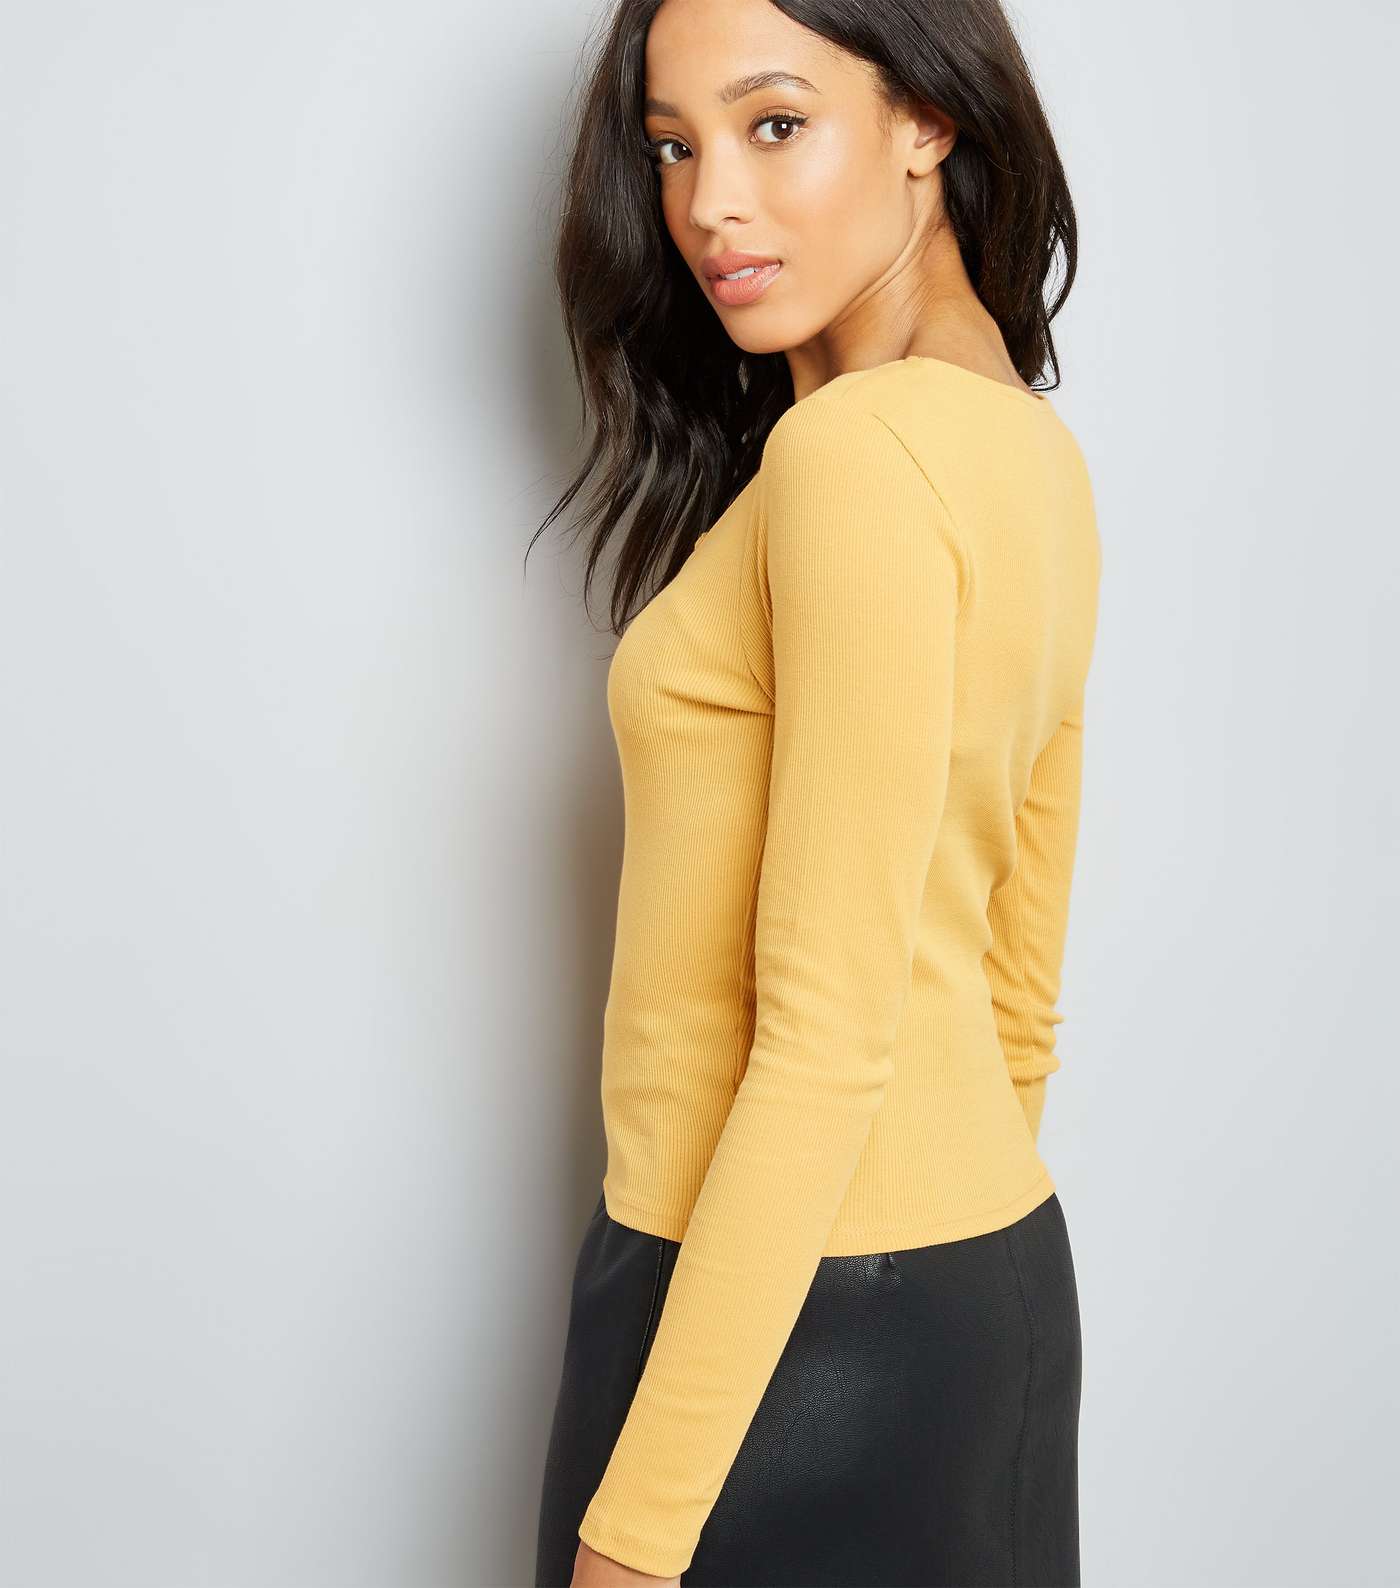 Mustard Yellow Lace-Up Neck Long Sleeve Top Image 3